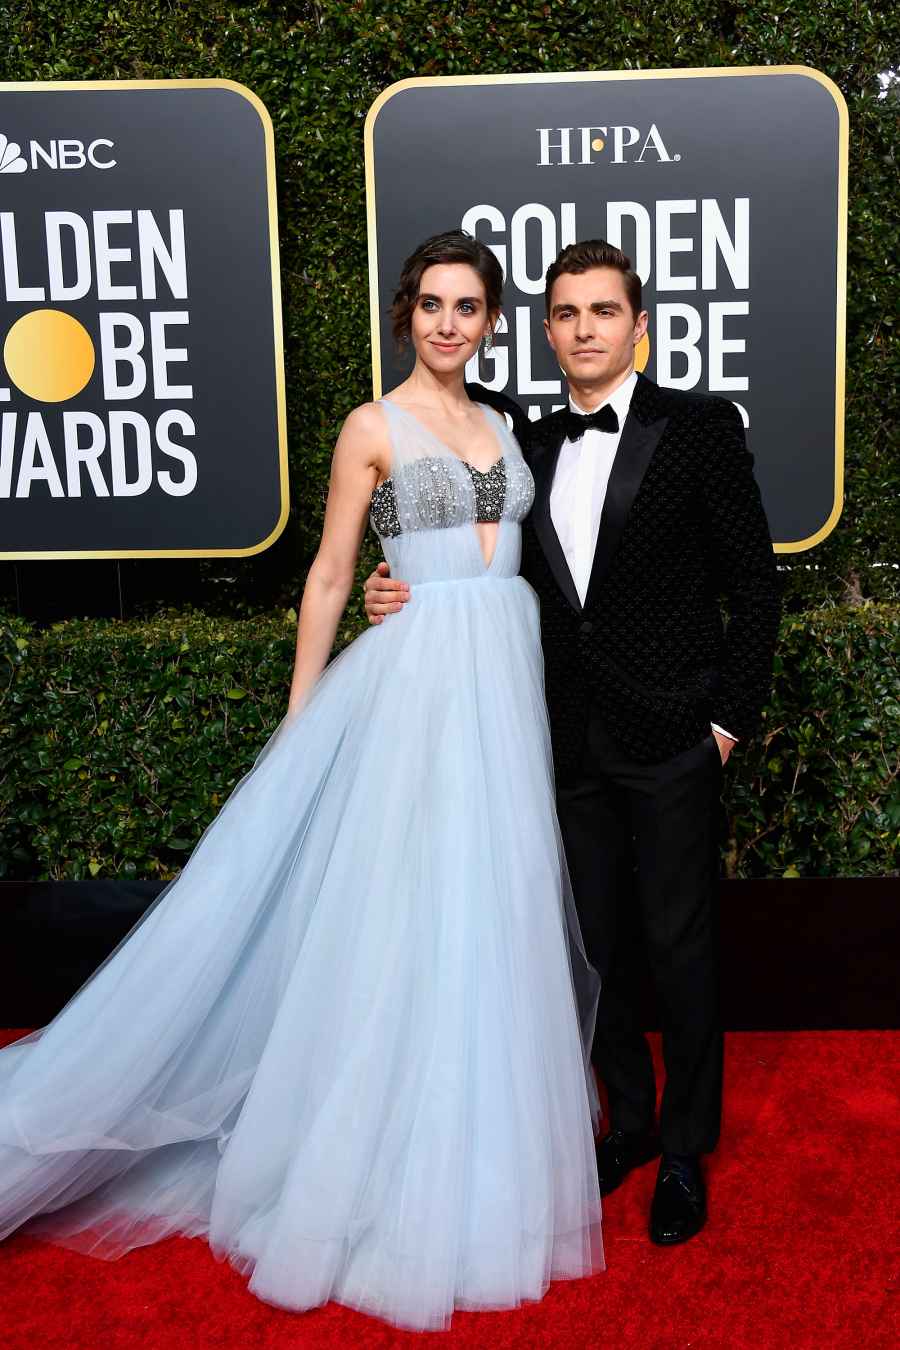 2019 Golden Globes What You Didn’t See on TV